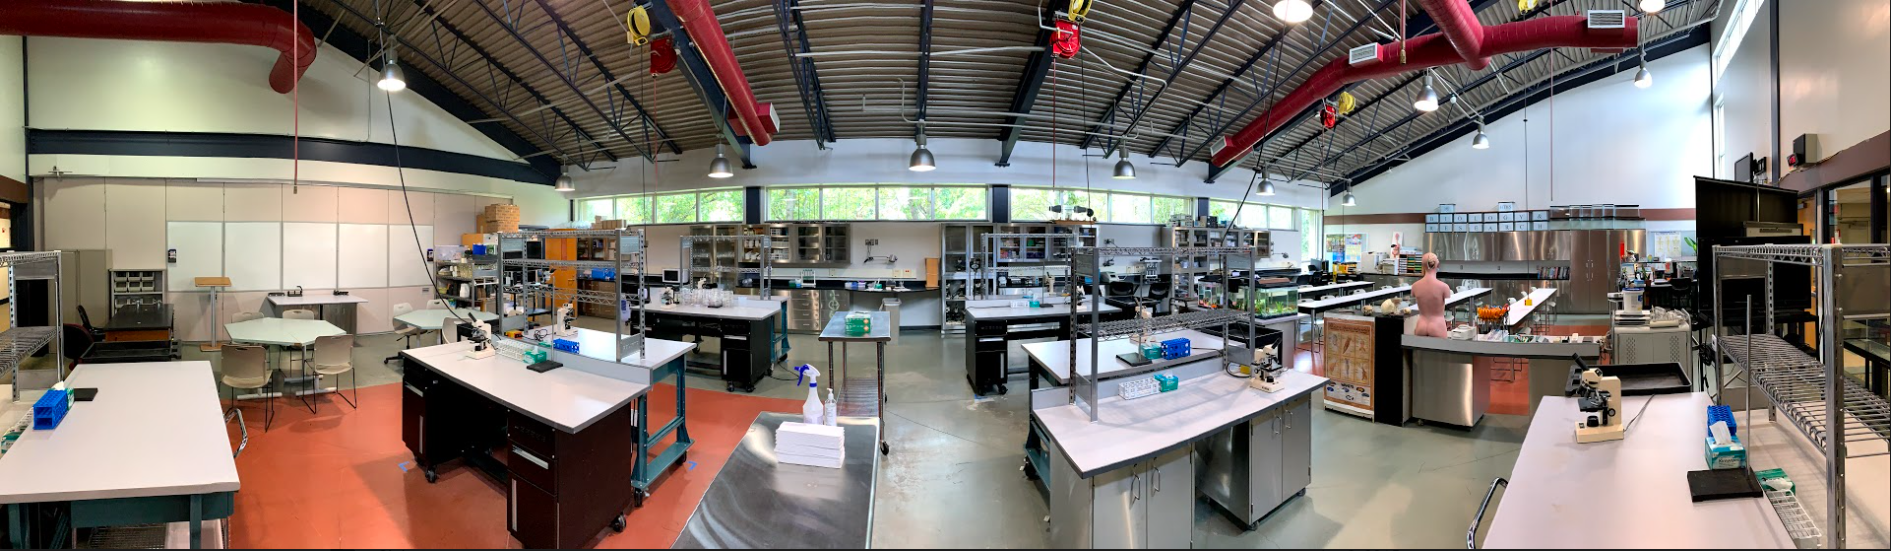 Research lab